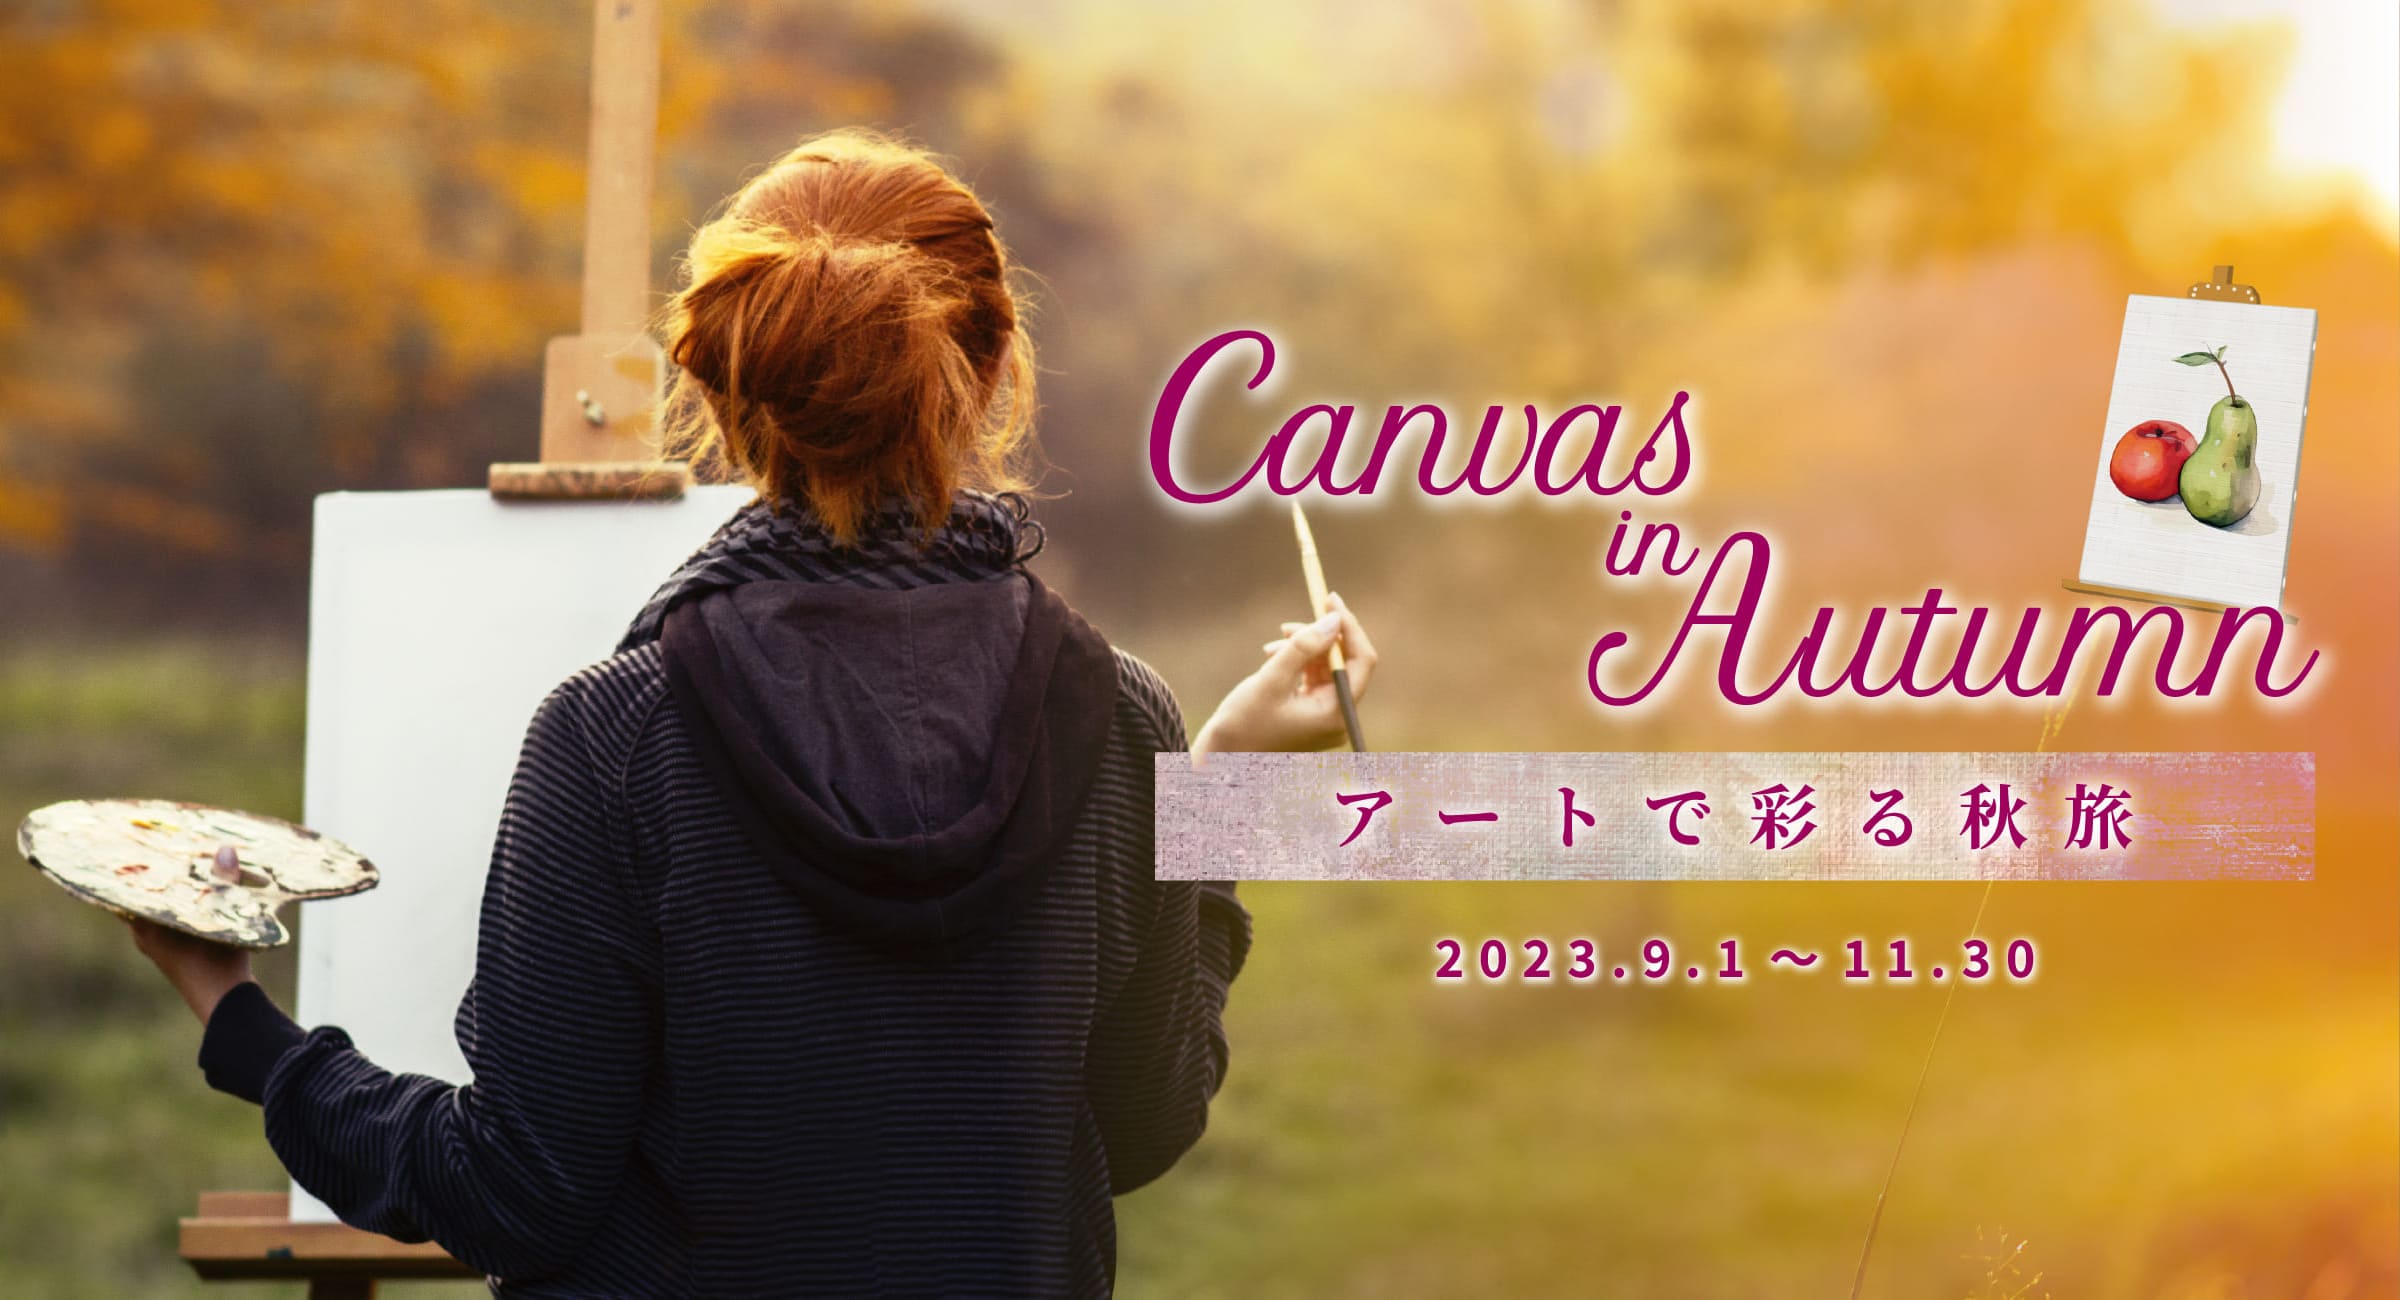 Canvas in Autumn アートで彩る秋旅　期間：2023.9.1～11.30